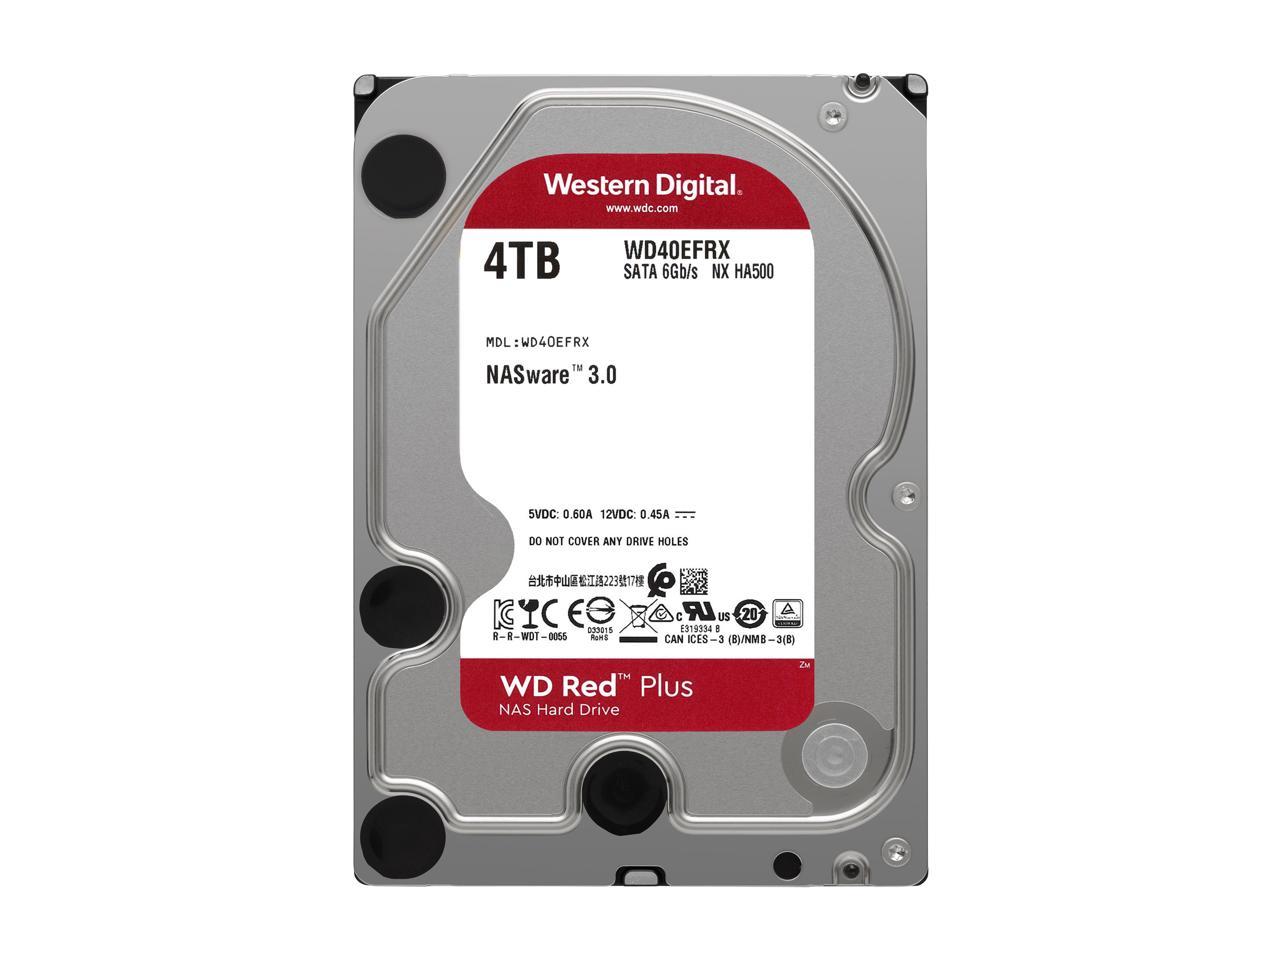 WD Red Plus 4TB NAS Hard Disk Drive - 5400 RPM Class SATA 6Gb/s, CMR, 64MB Cache, 3.5 Inch - WD40EFRX